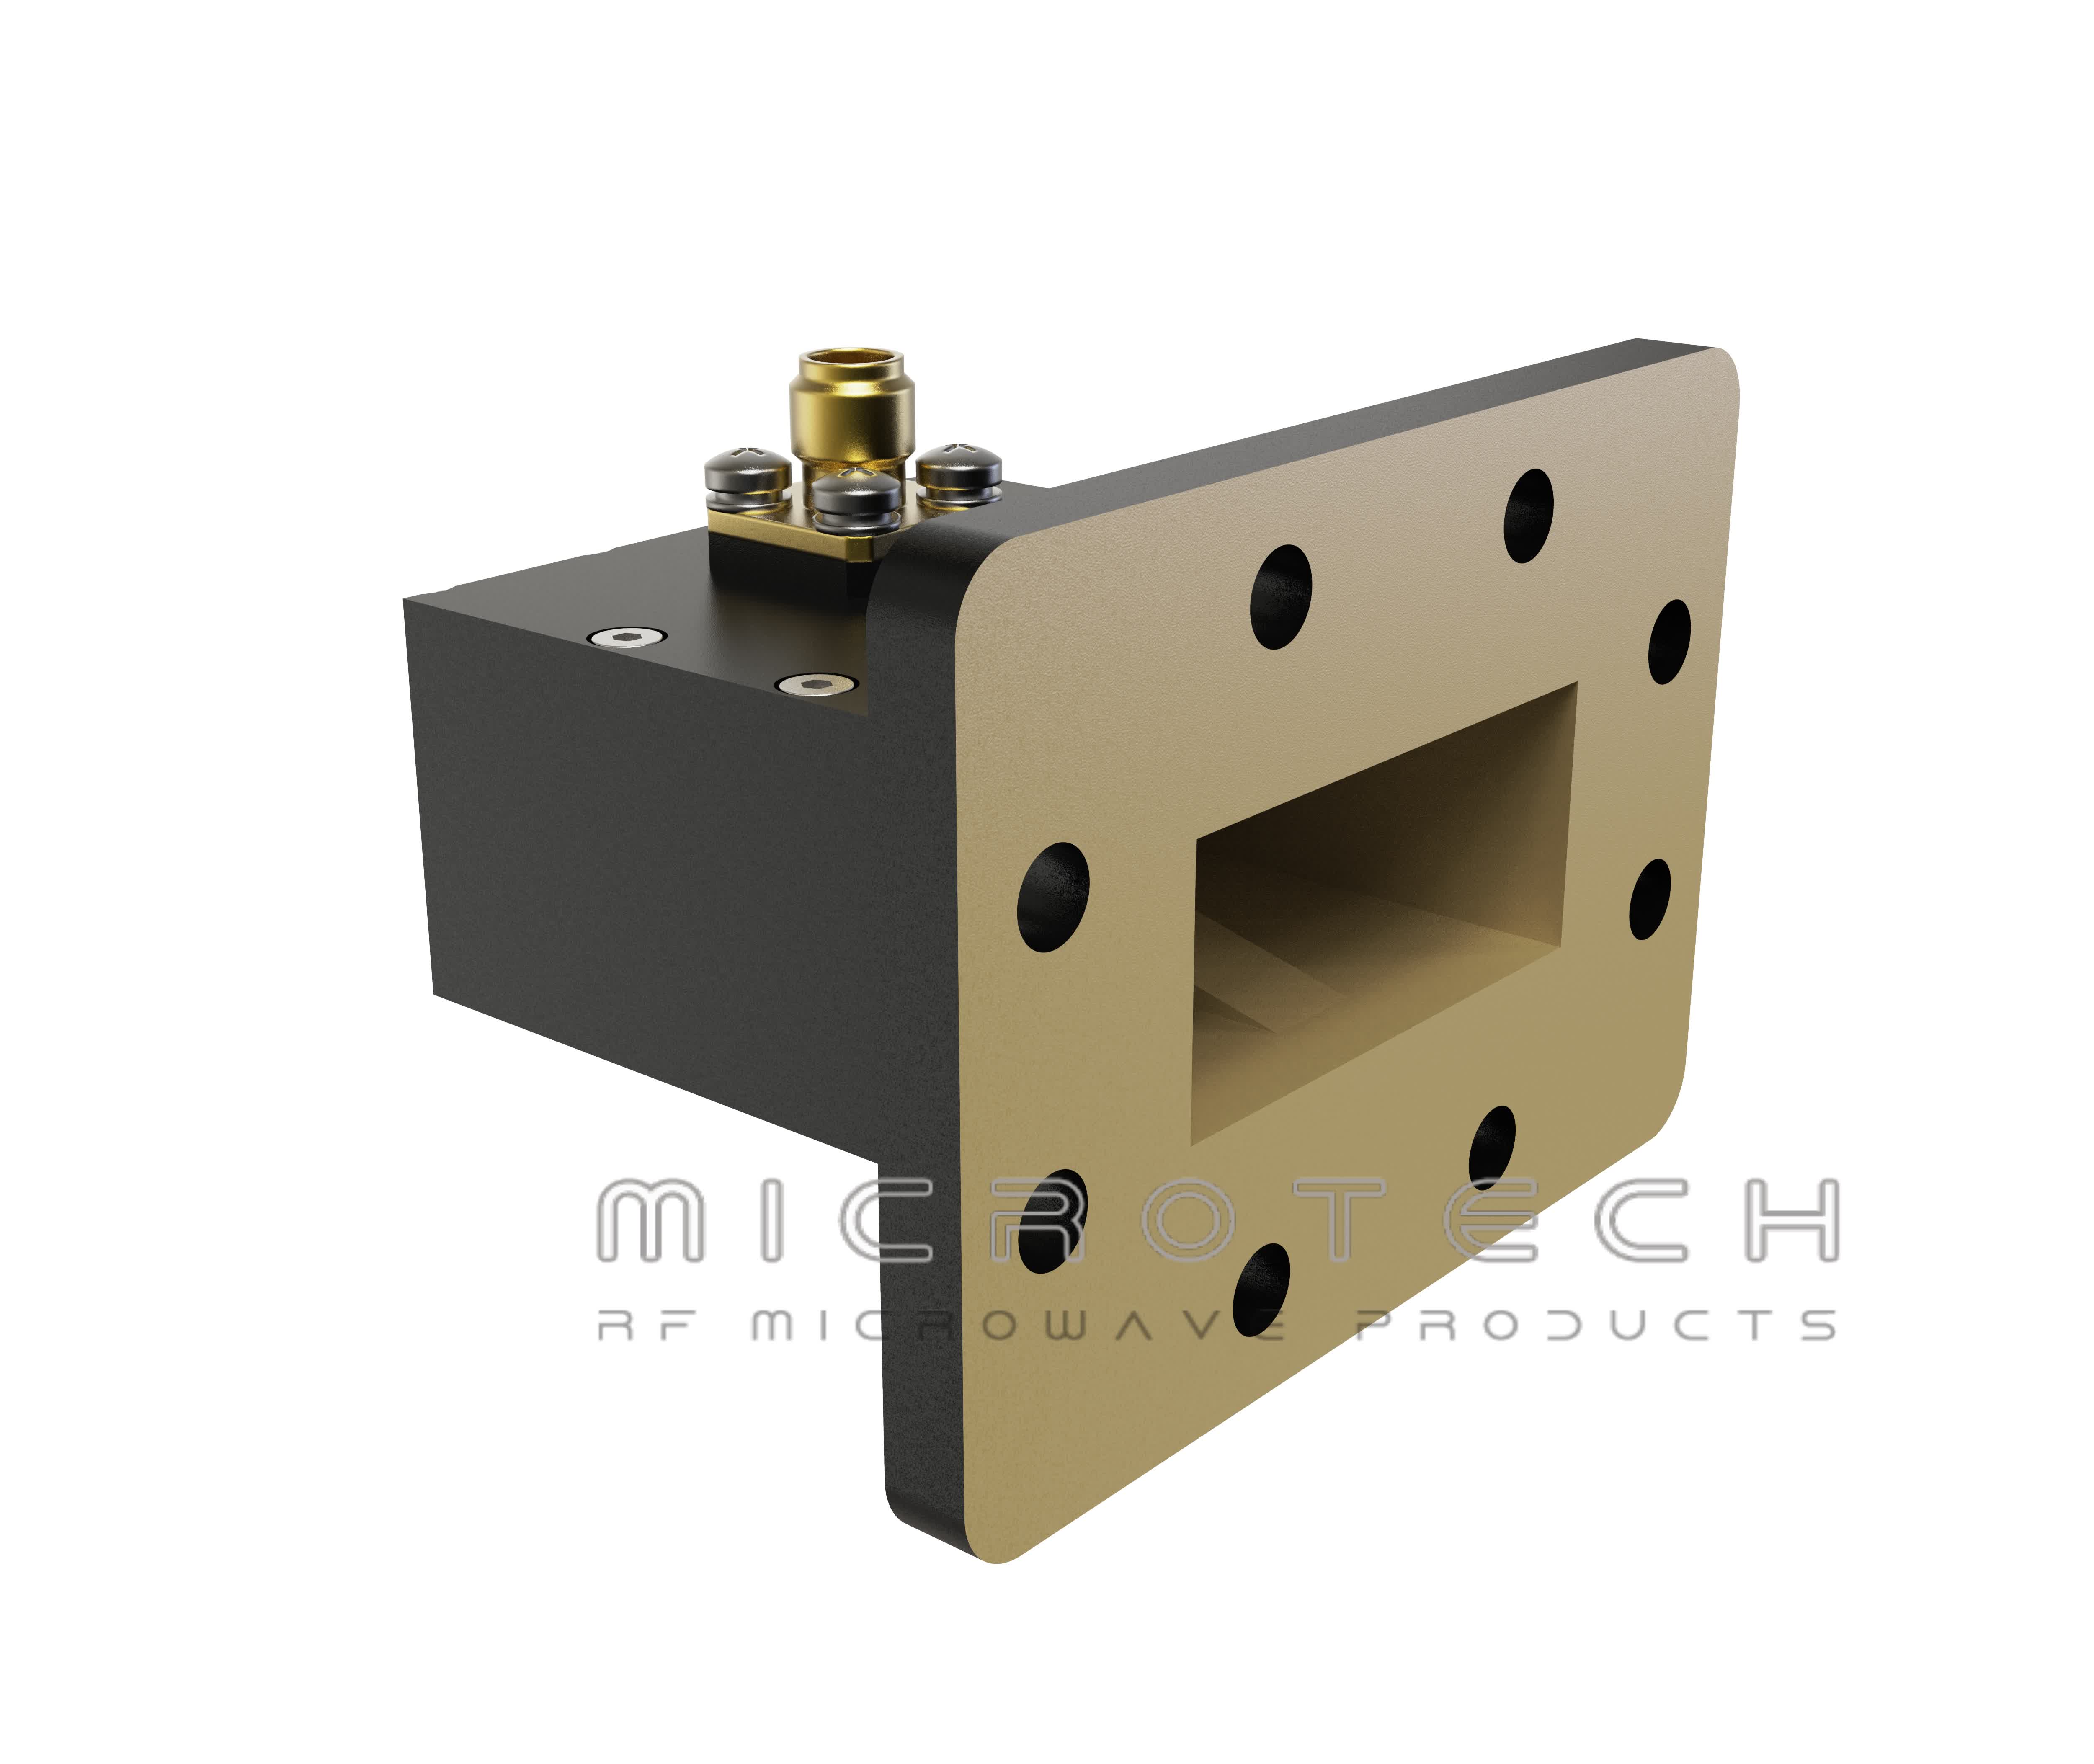 Waveguide to Coaxial Adapter 5.85-8.2GHz Frequency Range